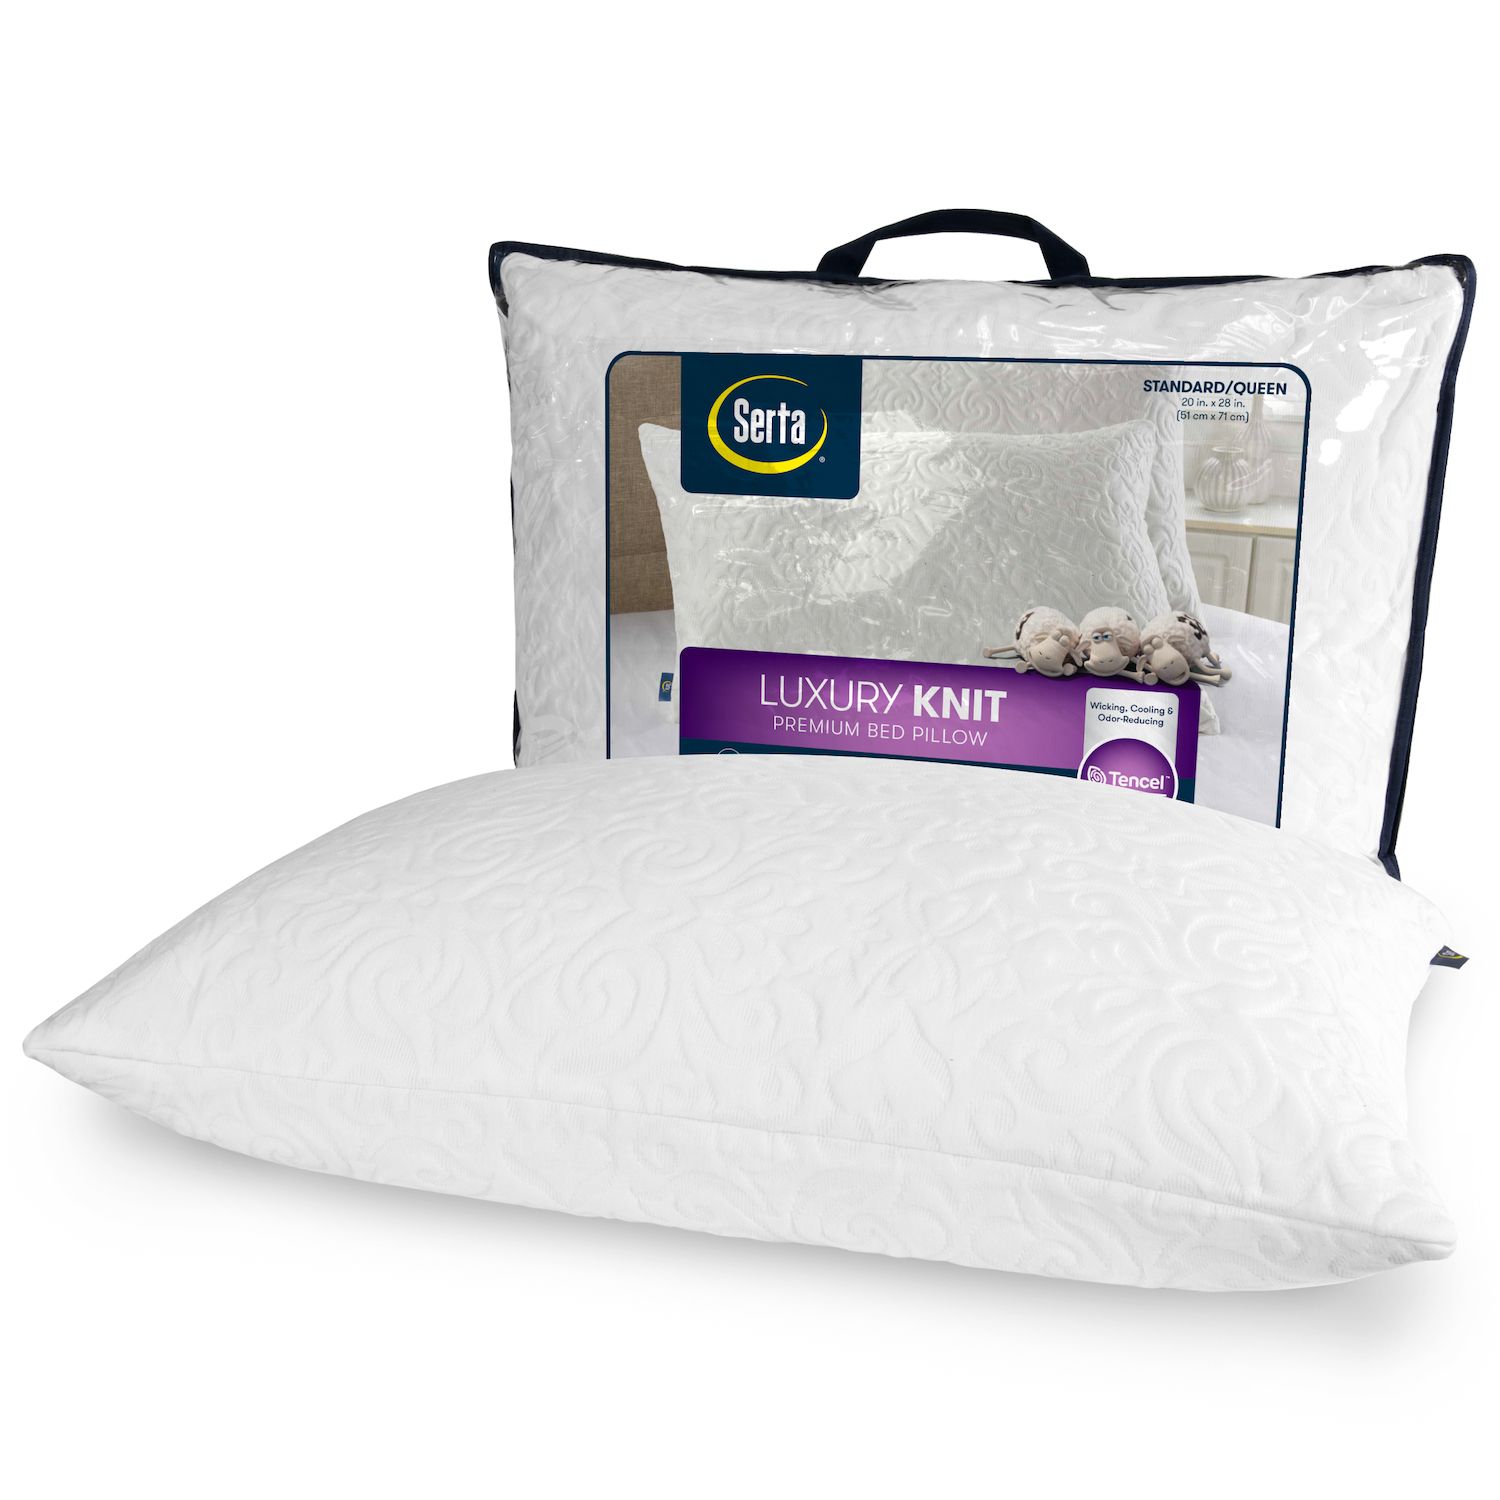 serta cool and comfy pillow